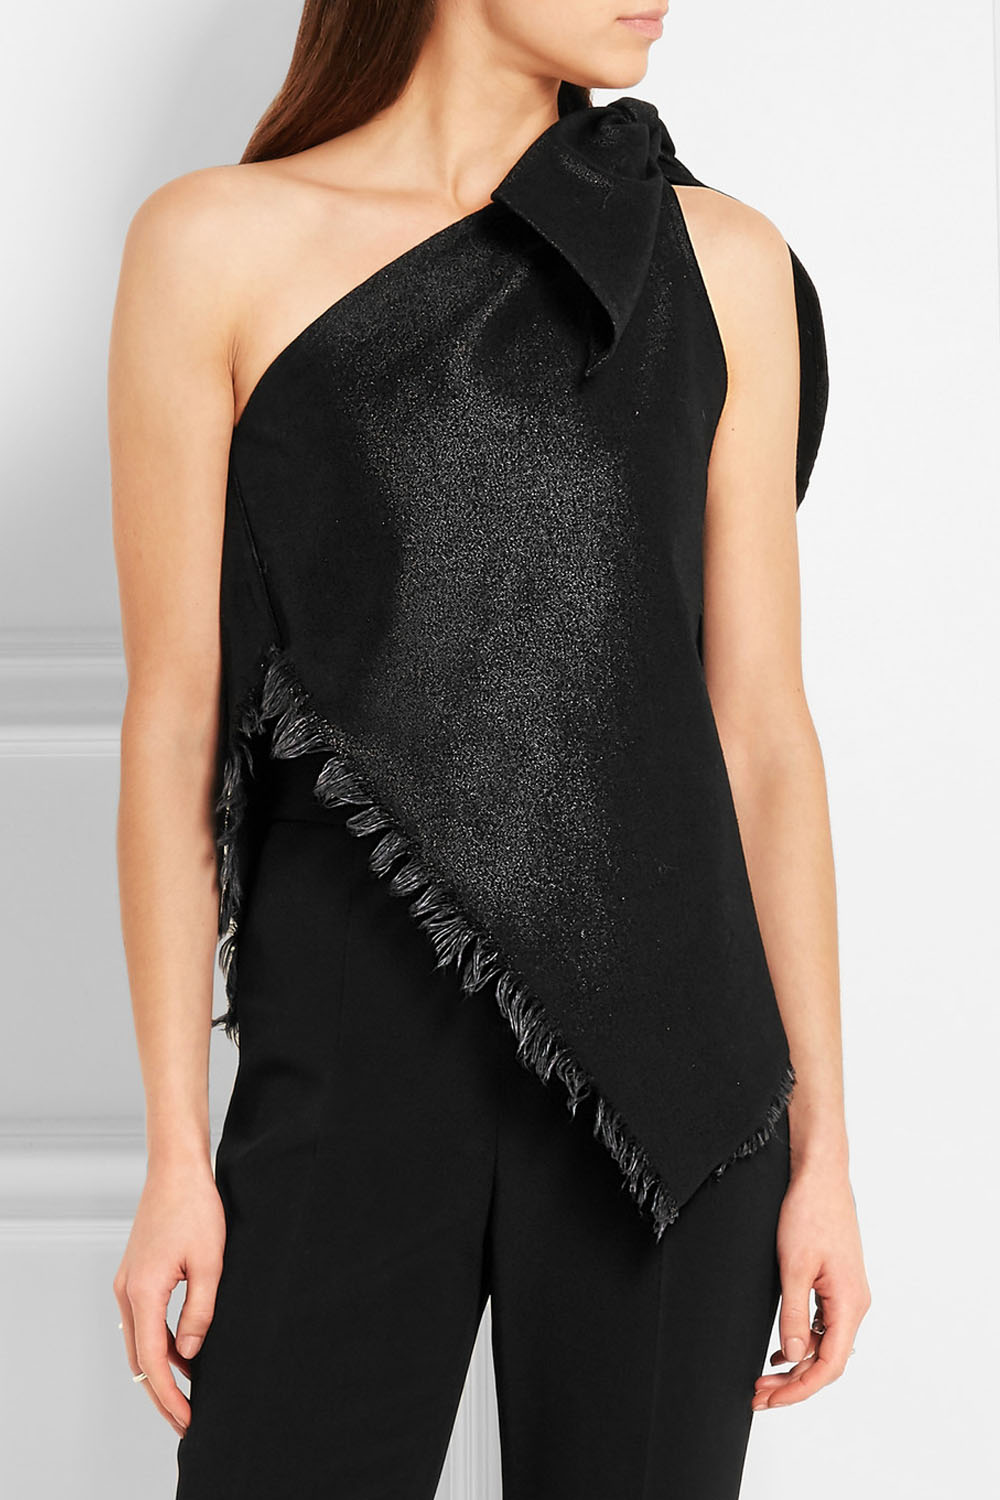 Marques' Almeida top, approx $639, from Net-a-porter.